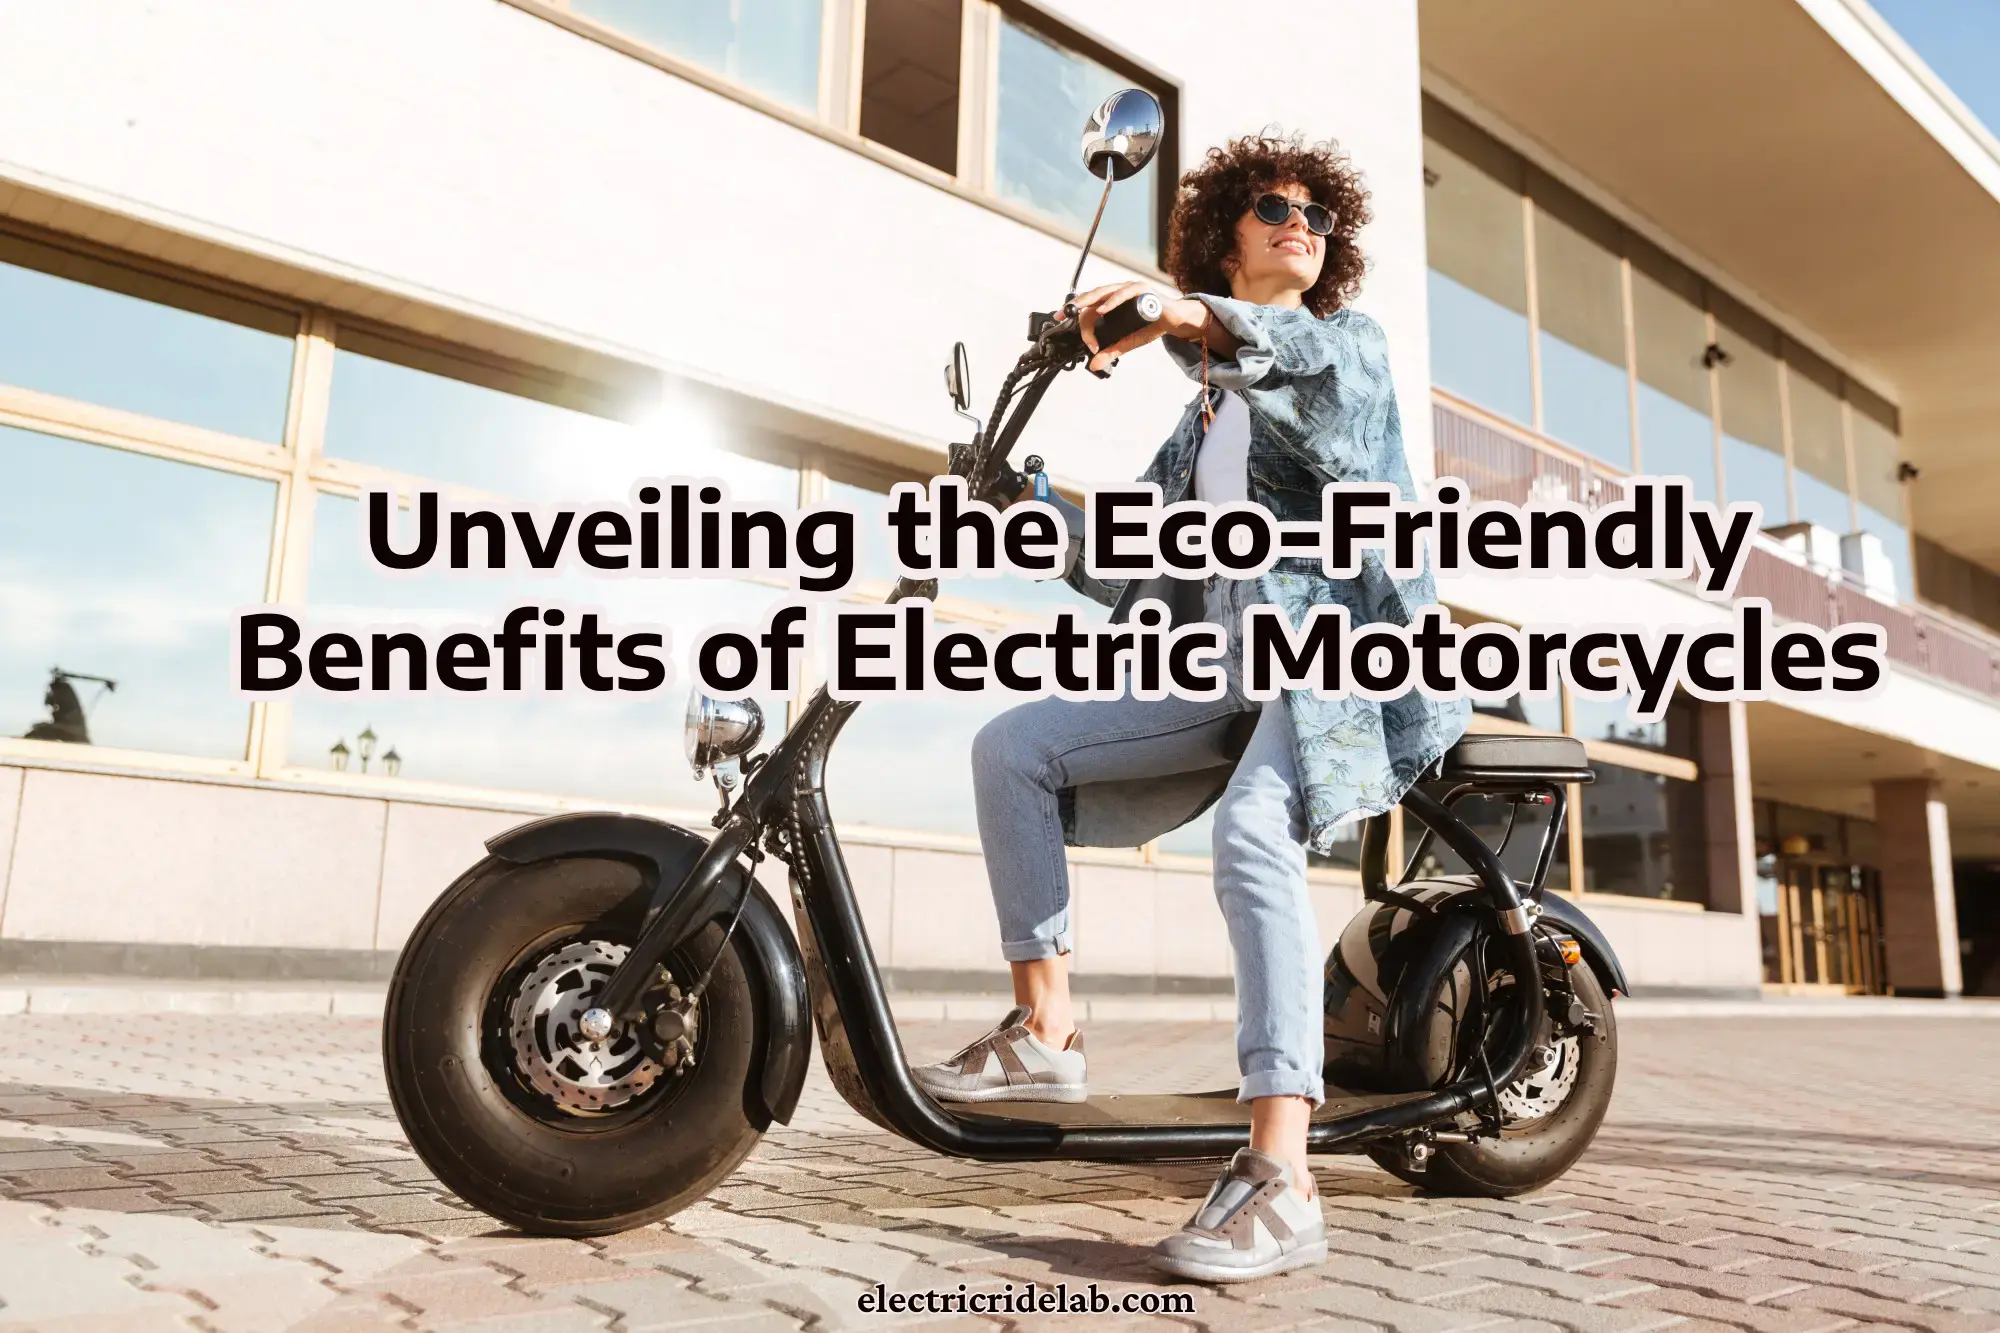 Unveiling the Eco-Friendly Benefits of Electric Motorcycles